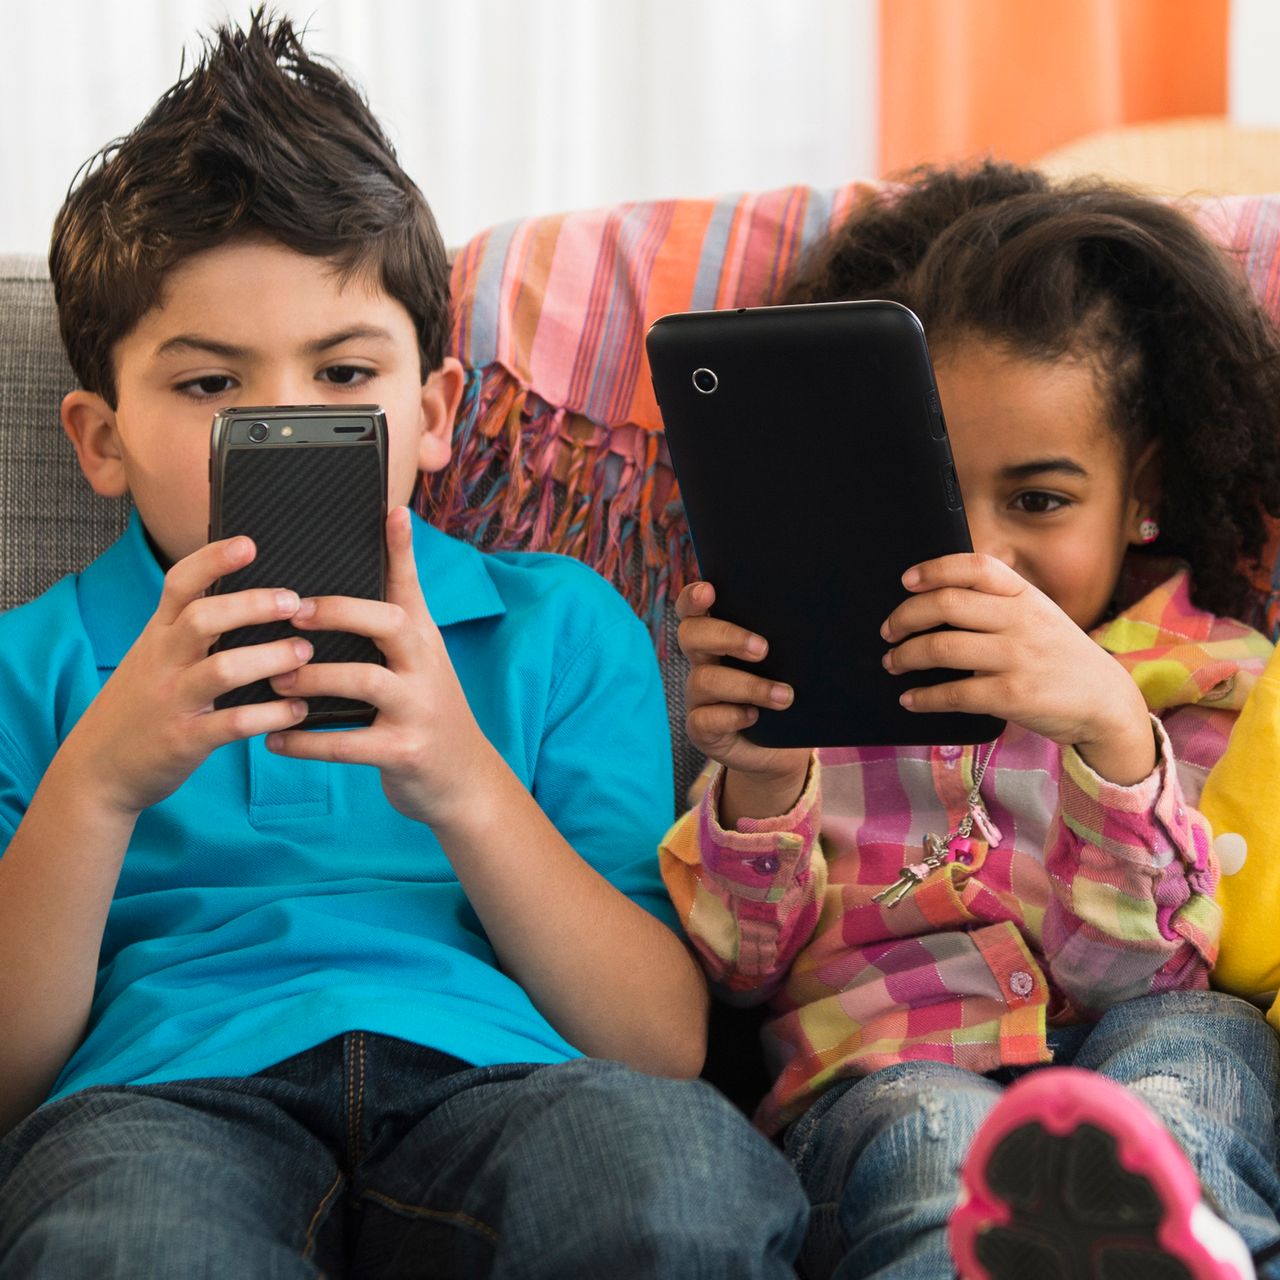 How to Monitor Children’s Activities on Cell Phone